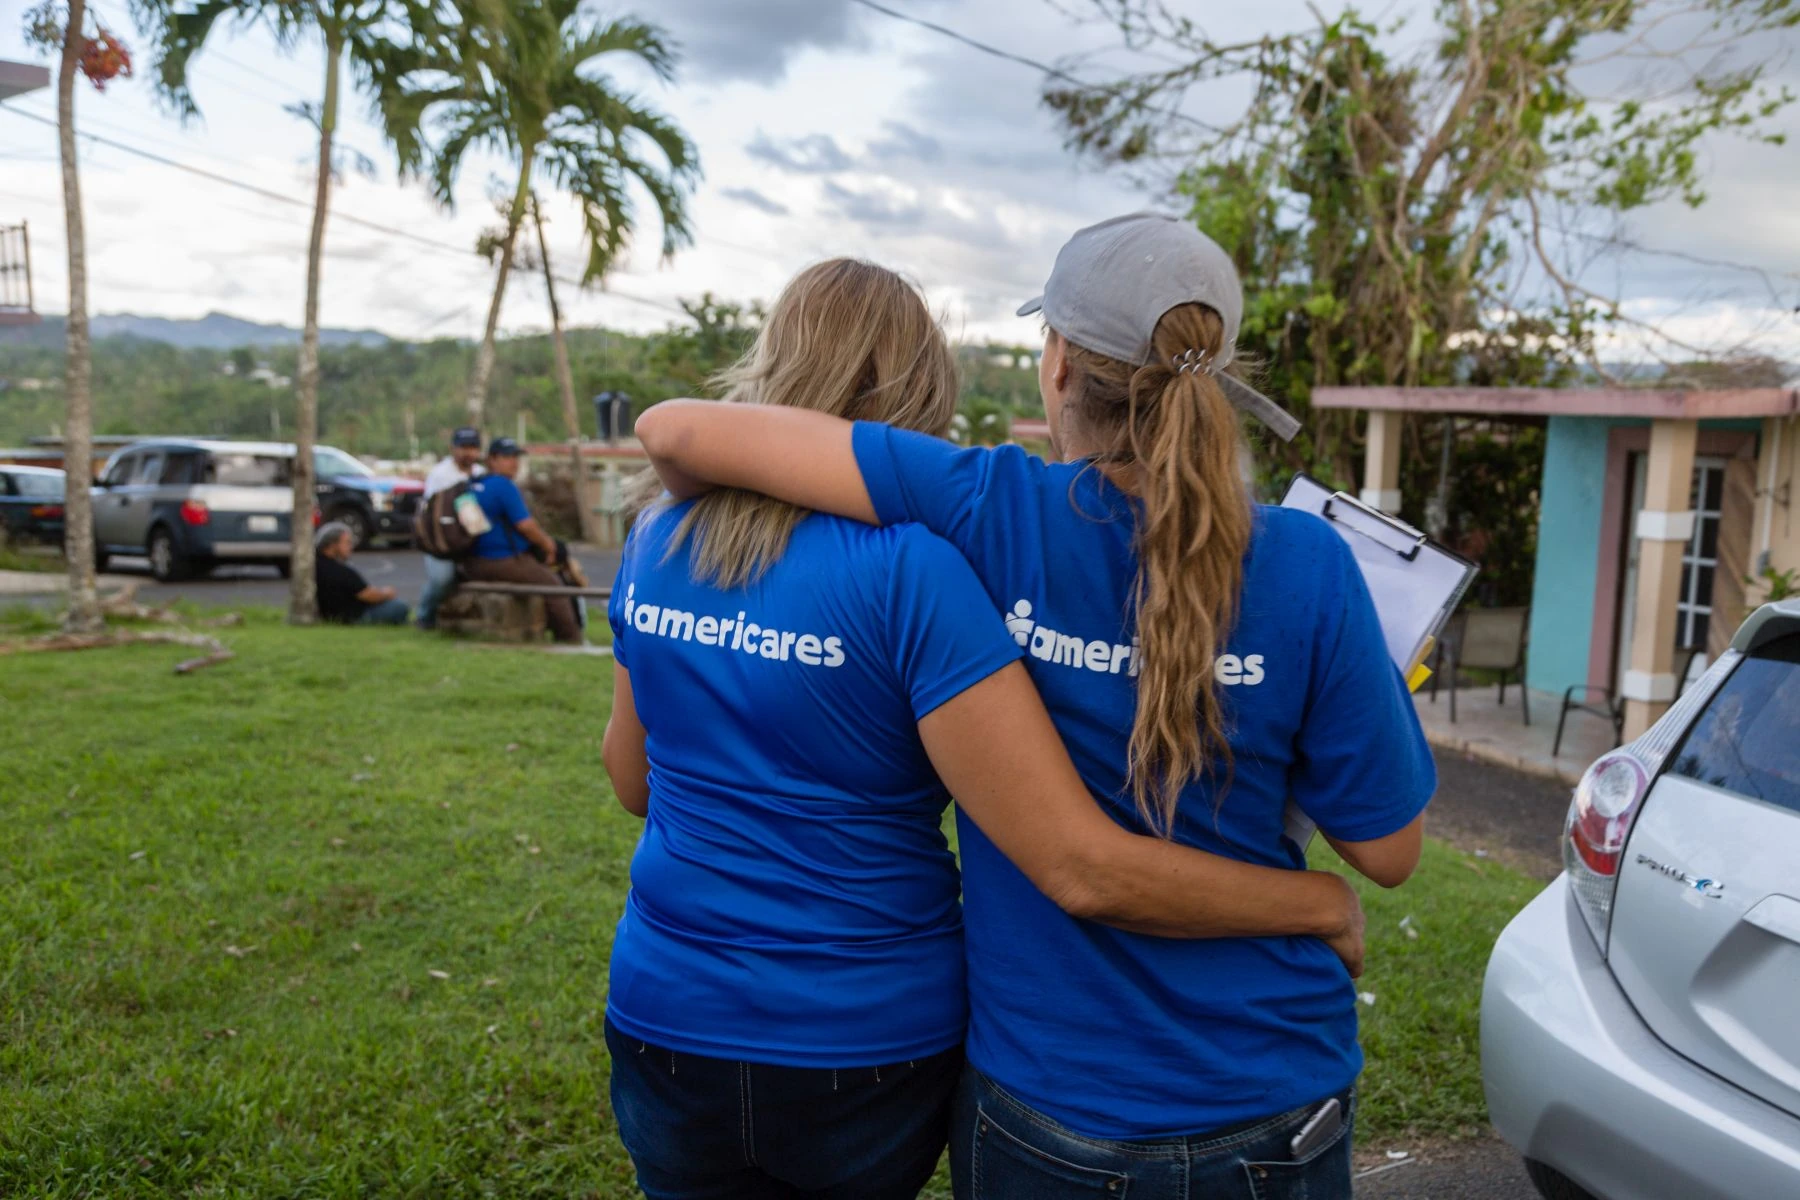 Two women in blue americares shirts have arms around each other as they walk together side by side back to the camera